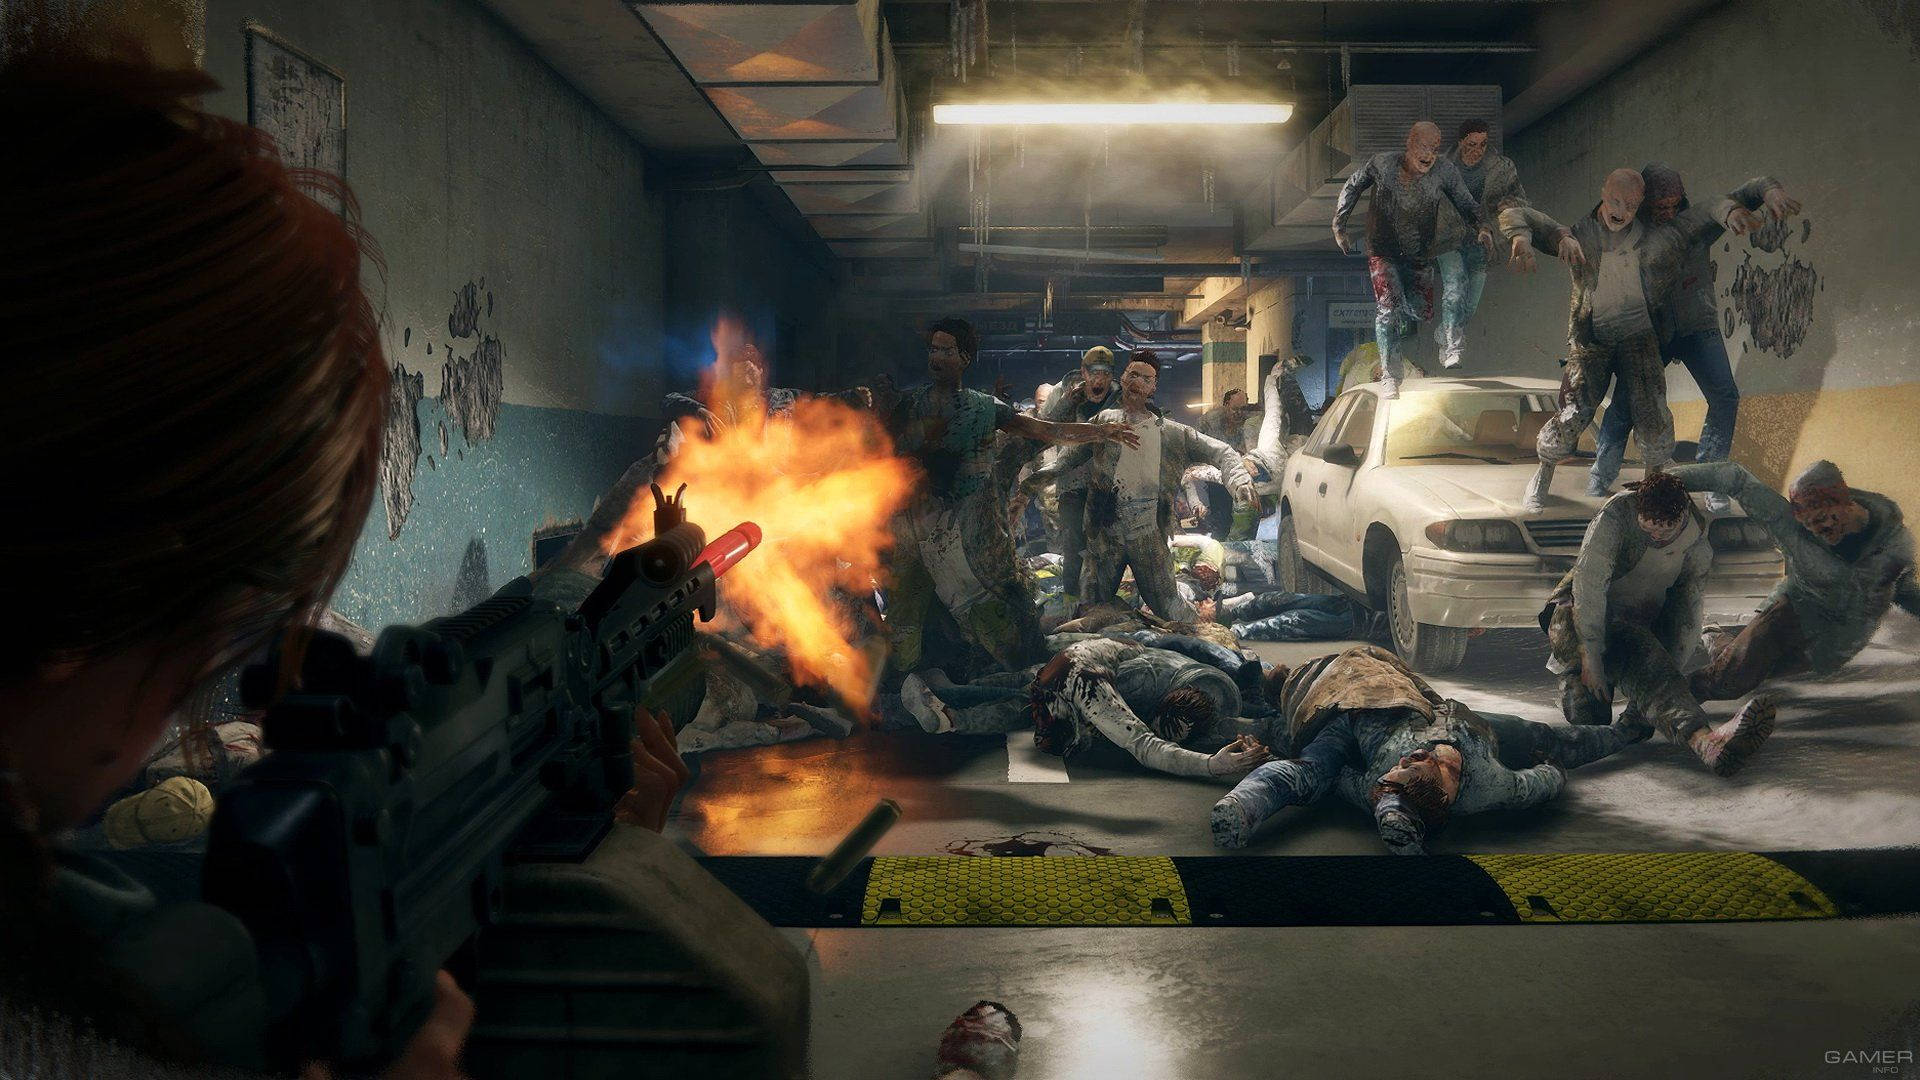 Apocalyptic Highway Tunnel Scene in World War Z Aftermath – Gaming Screenshot Wallpaper